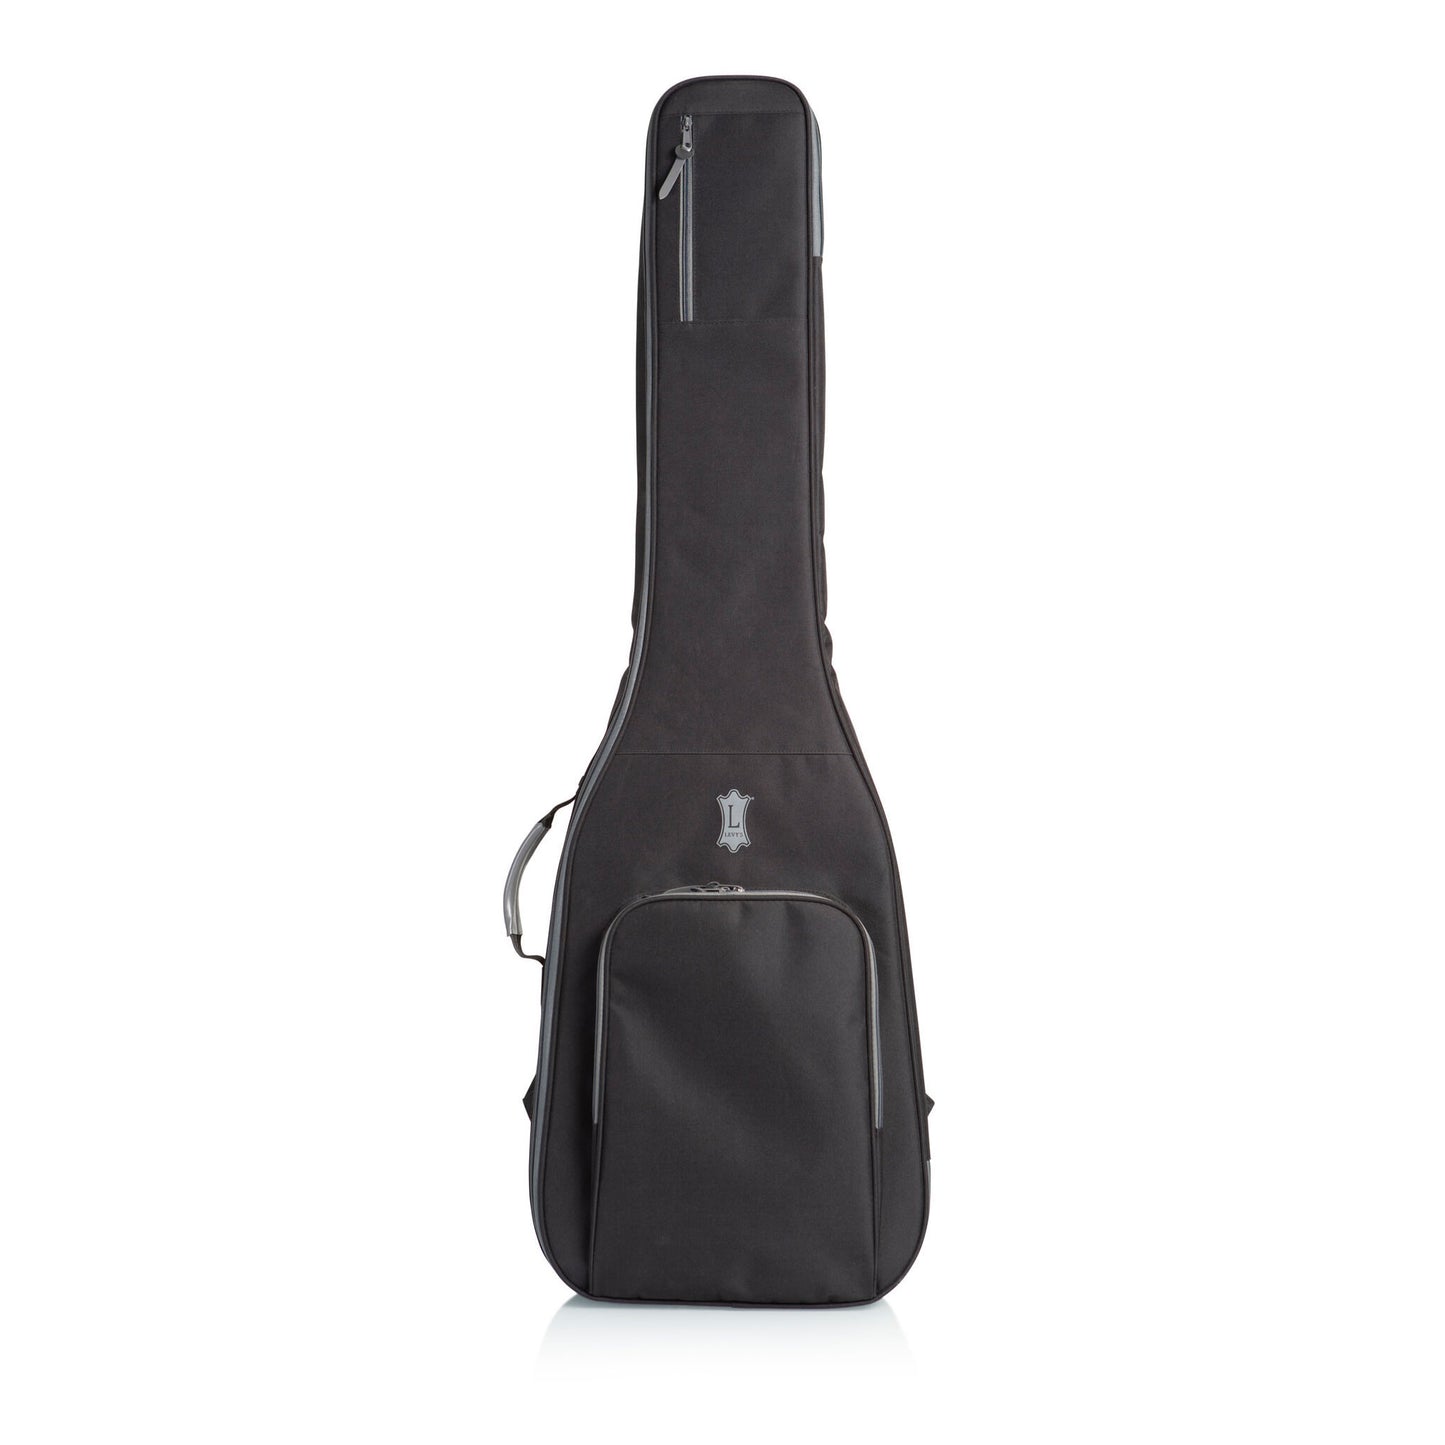 Levy’s 100-Series Gig Bag for Bass Guitars